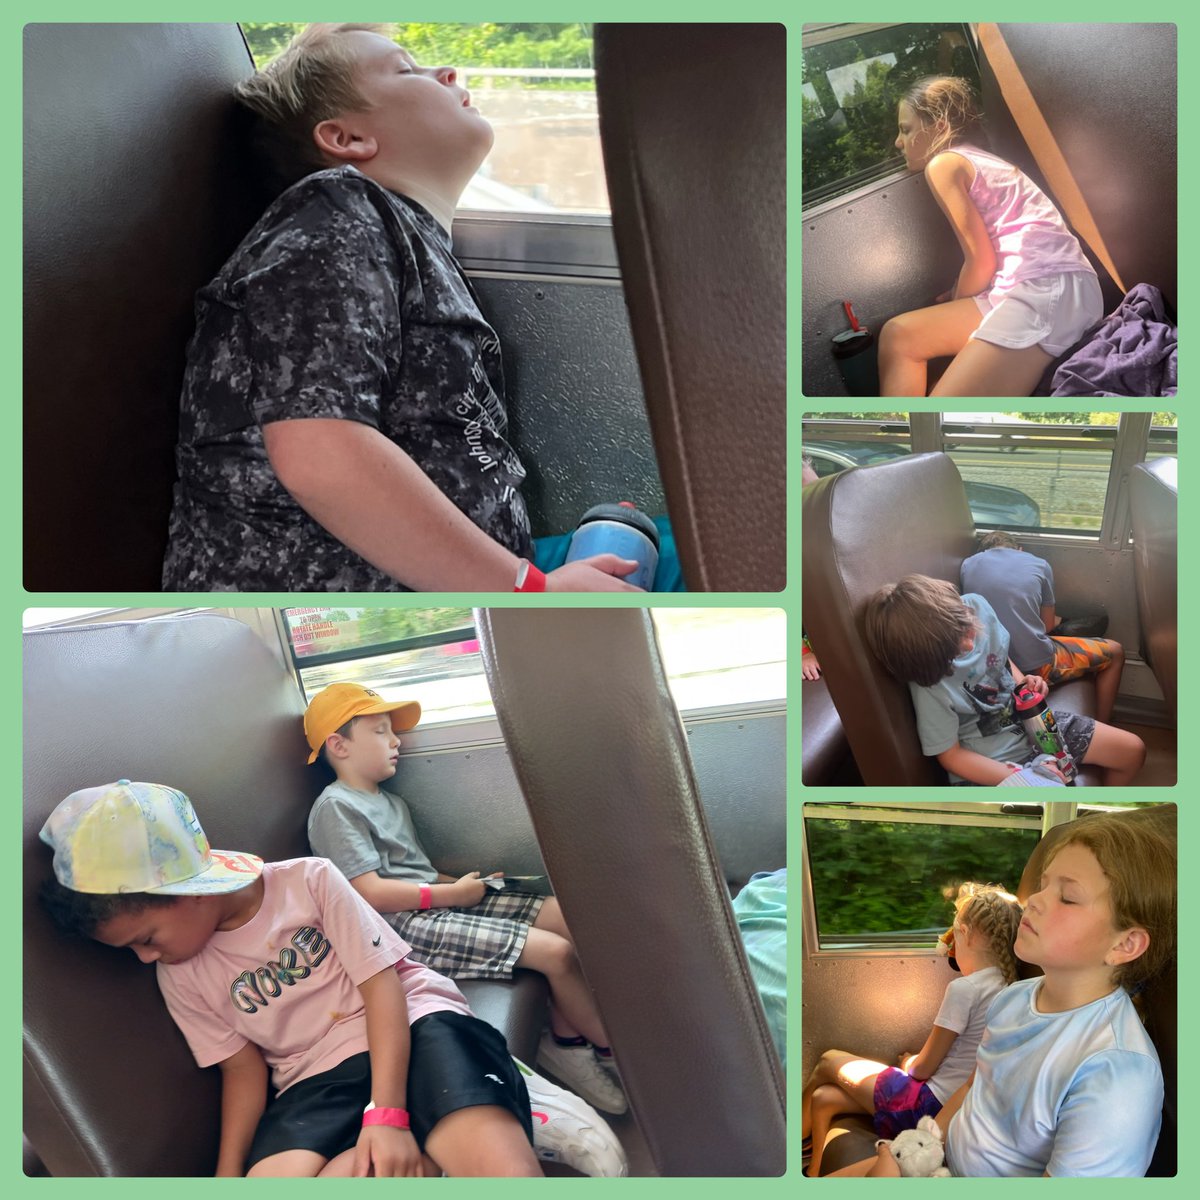 The signs of a successful field trip to Bays Mountain on the bus ride back to Fairmont 🚍#BaysMountain #WeWalkedALot #SoTired😴 #WeAllSleptWellThatNight